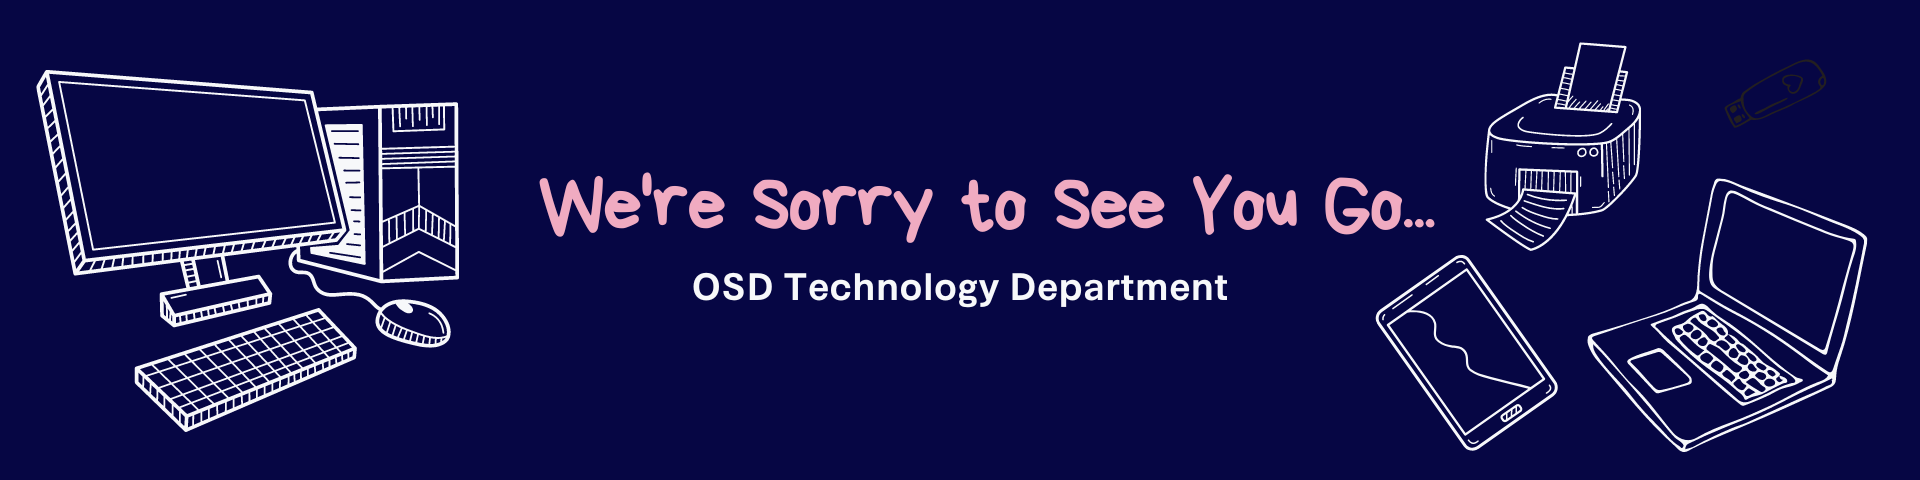 Sorry_to_see_you_go....png